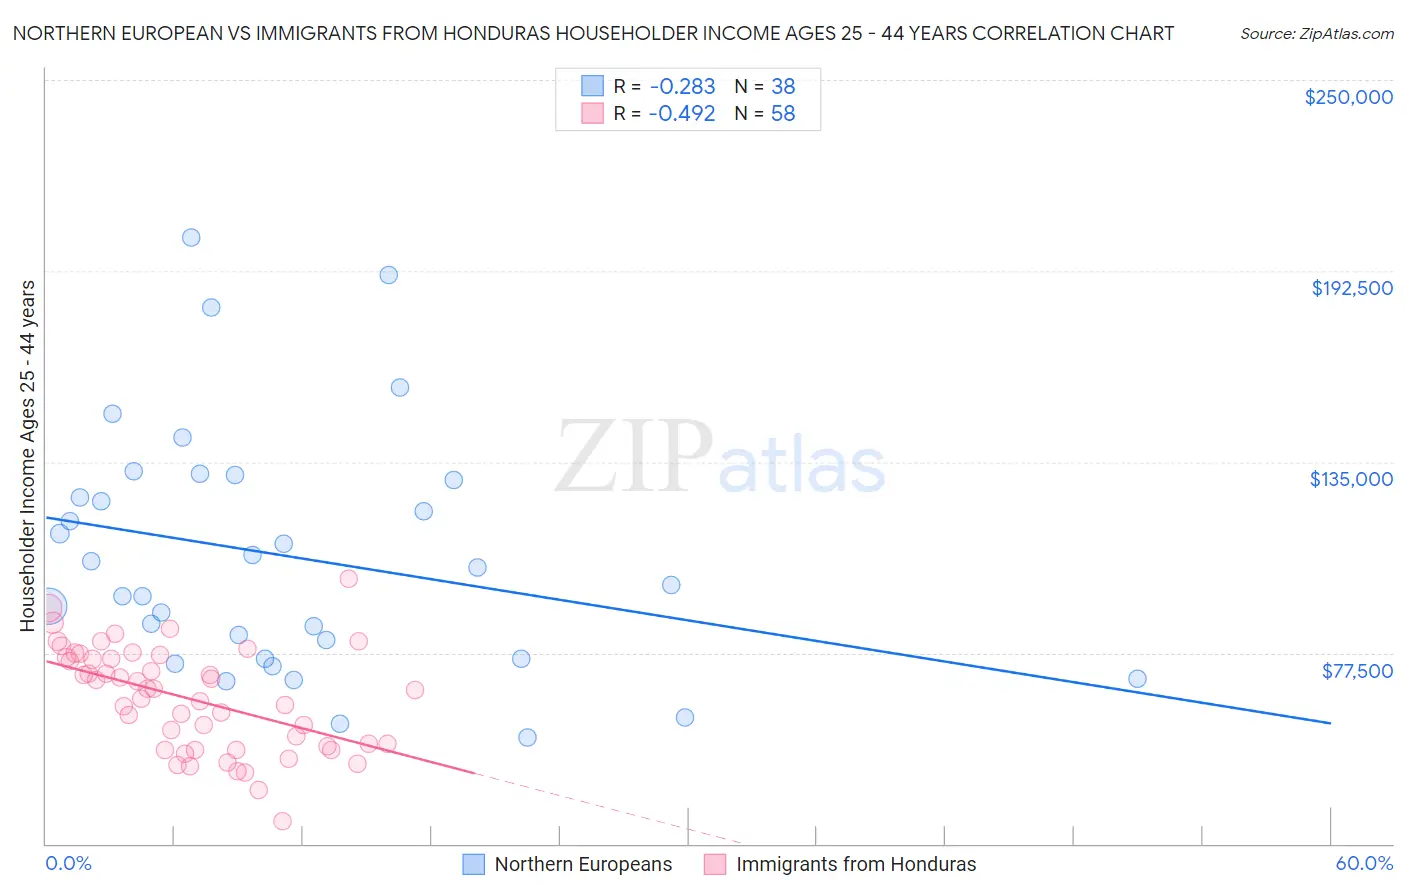 Northern European vs Immigrants from Honduras Householder Income Ages 25 - 44 years